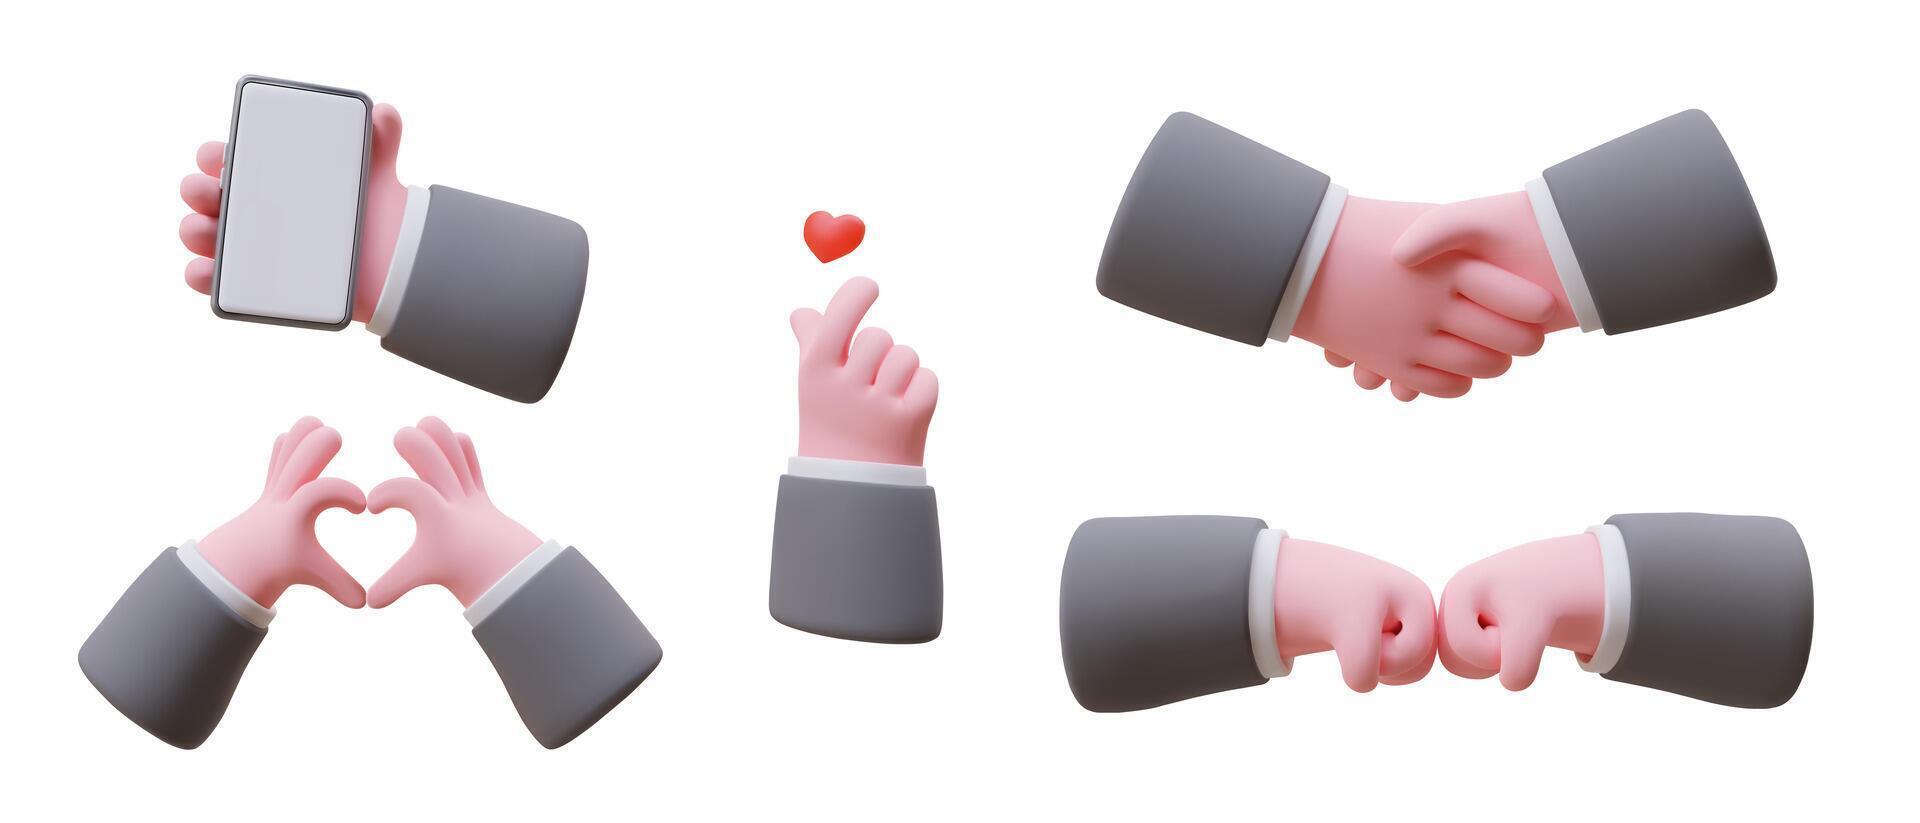 Gesture language in social networks. Set of 3D illustrations about positive user reactions vector